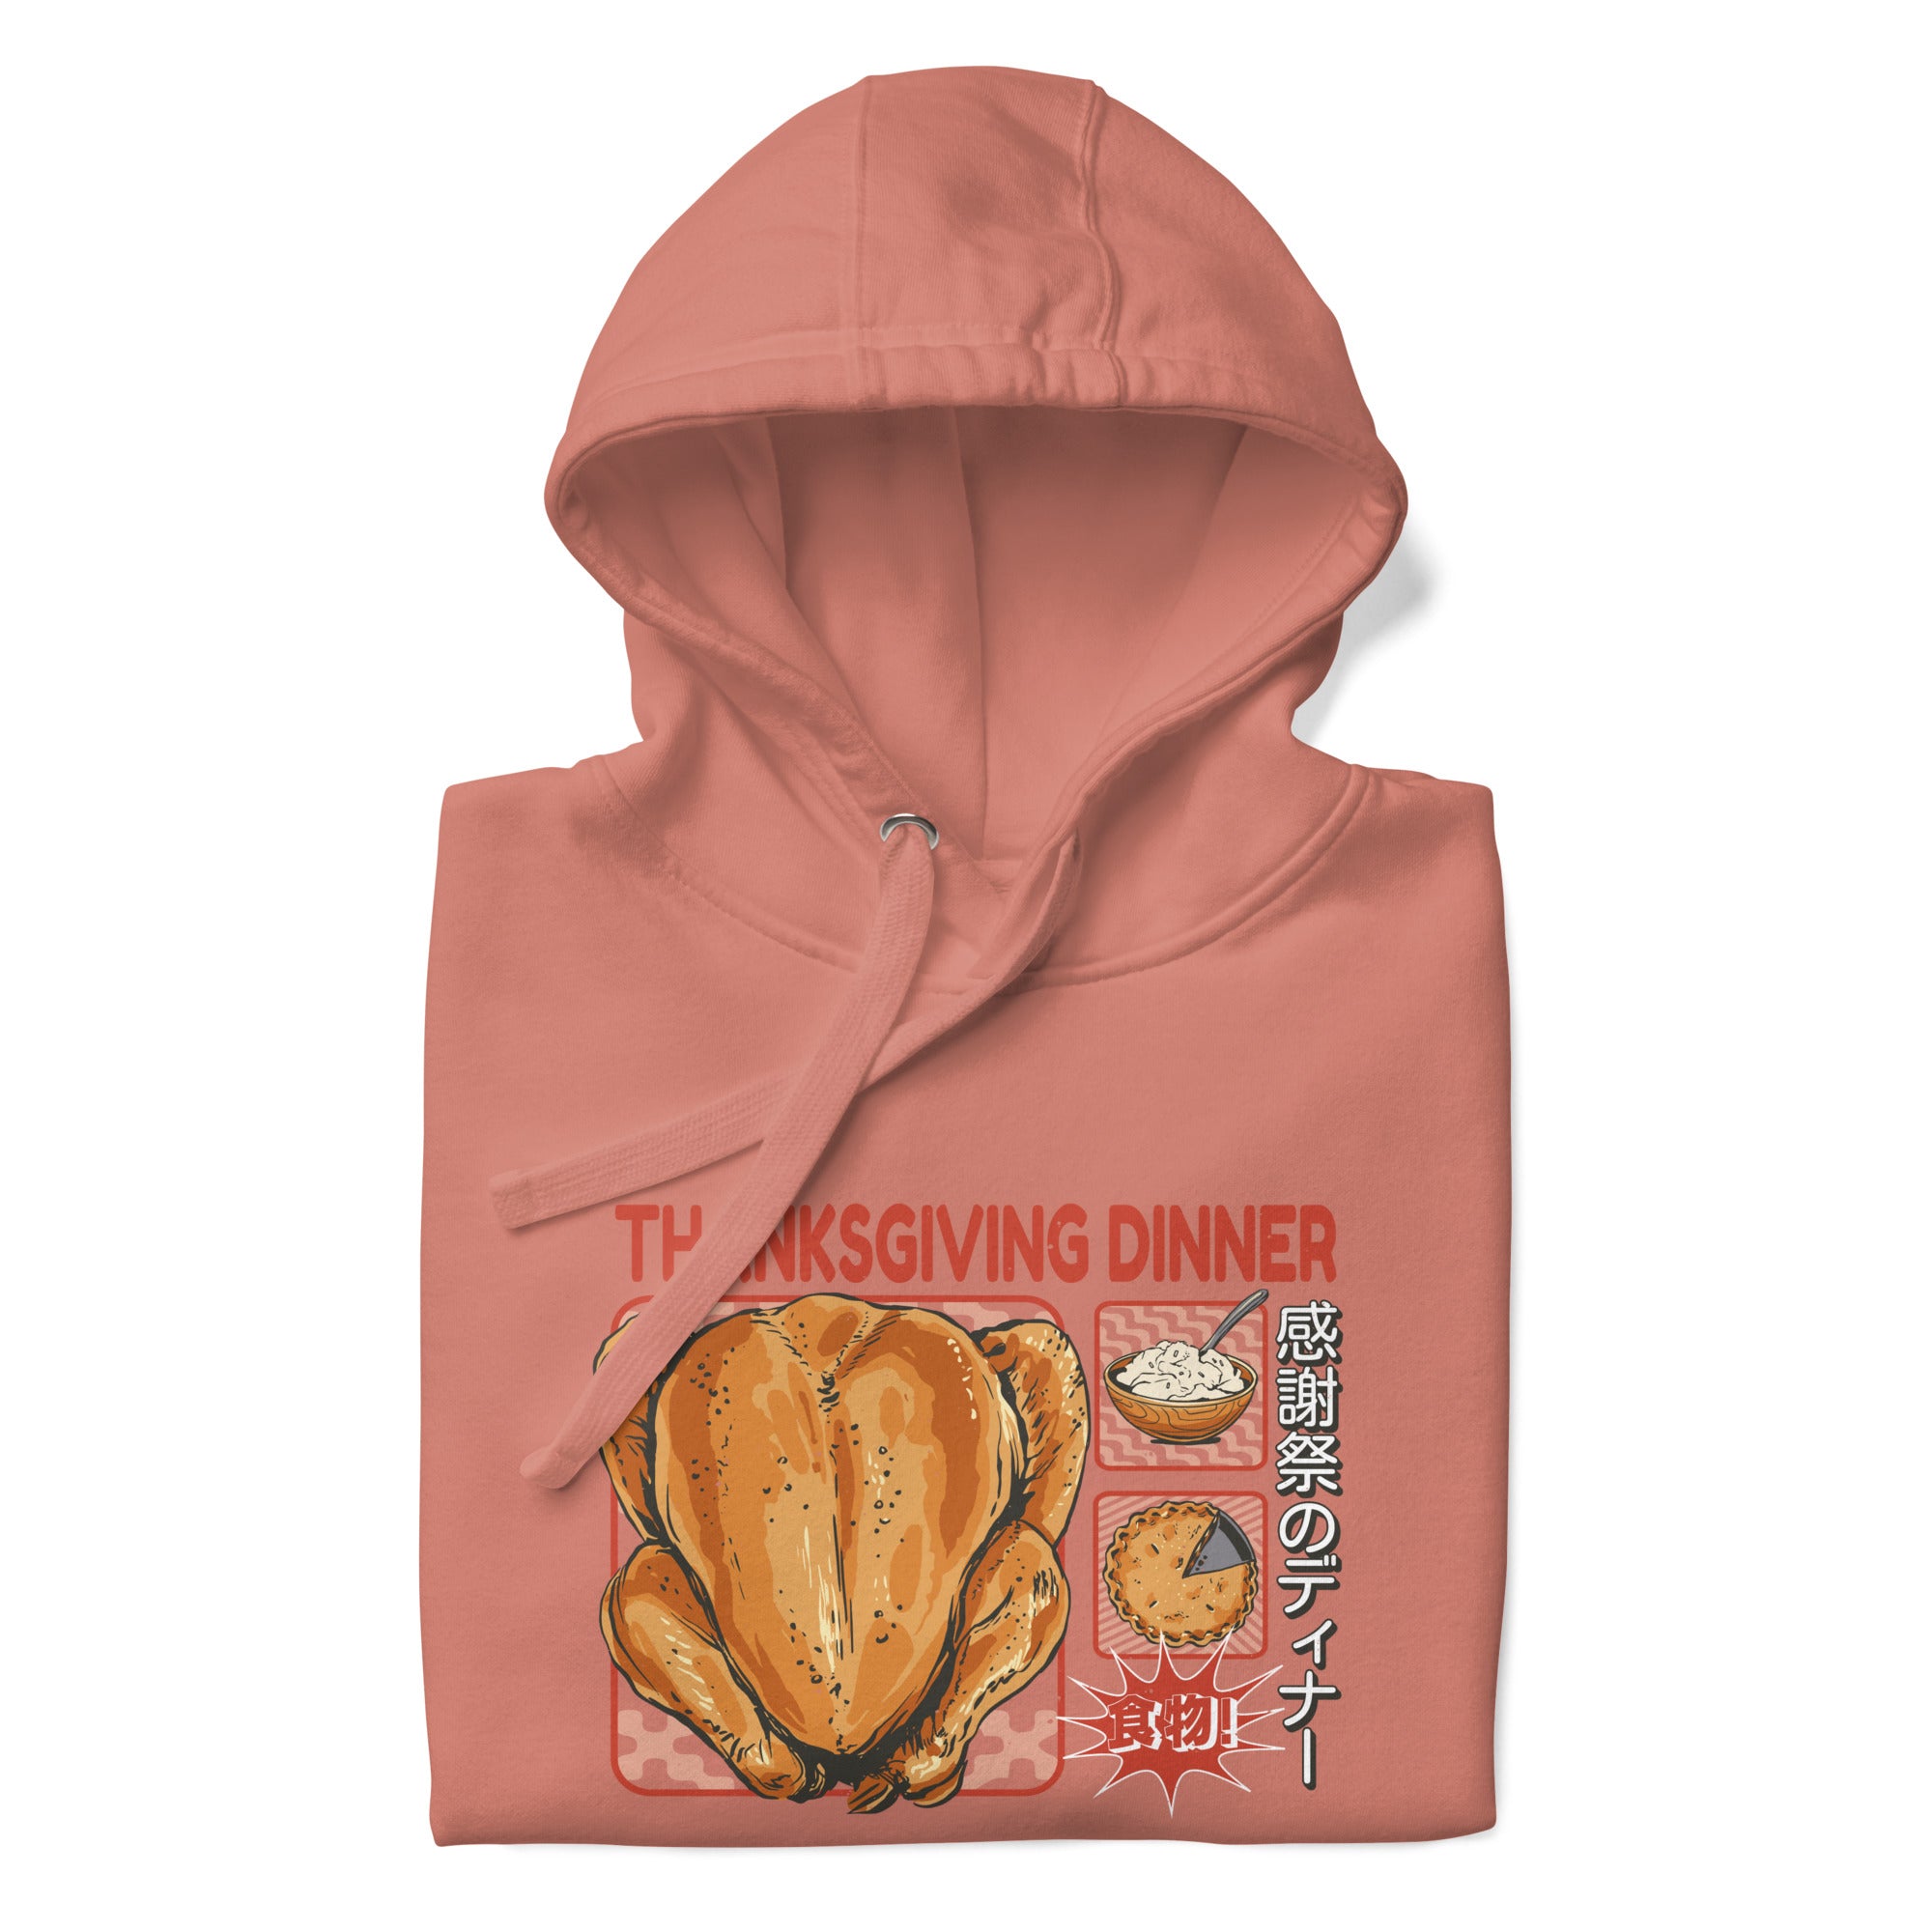 Folded Japanese Thanksgiving Hoodie in Dusty Rose color: A soft, muted pinkish-red hoodie with a graphic print of a Japanese Thanksgiving, featuring a roast chicken, Japanese potato salad, and an apple pie. The hoodie is neatly folded.